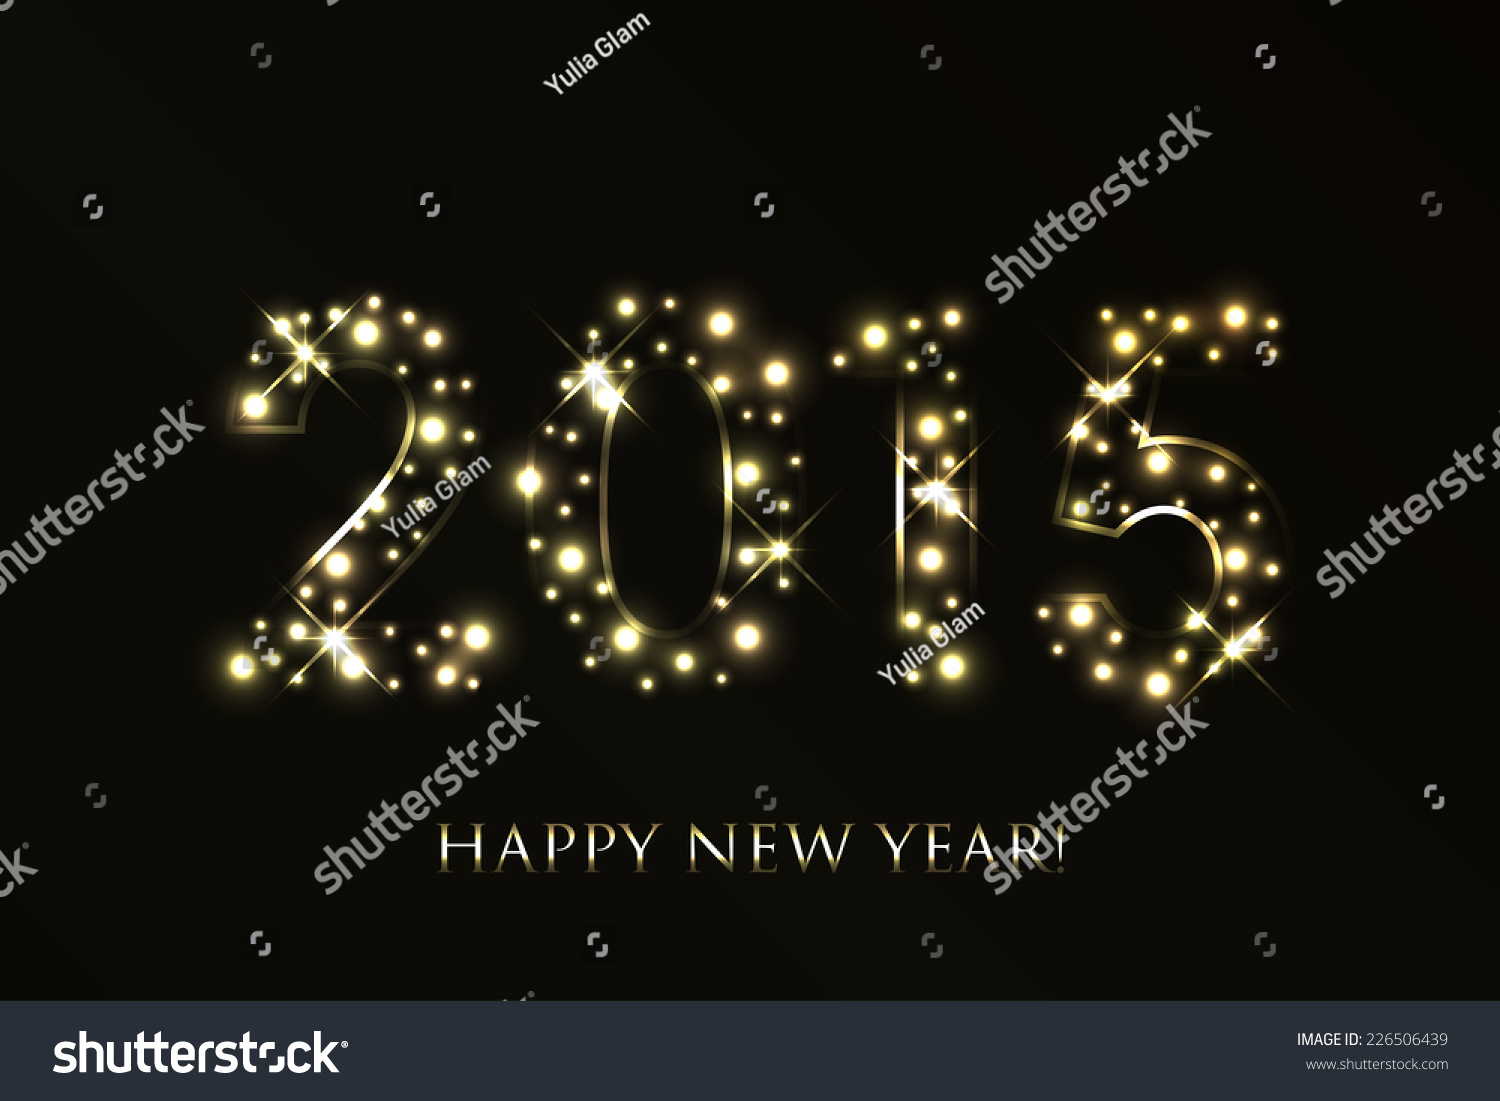 Vector 2015 Happy New Year background with gold sparkles #226506439